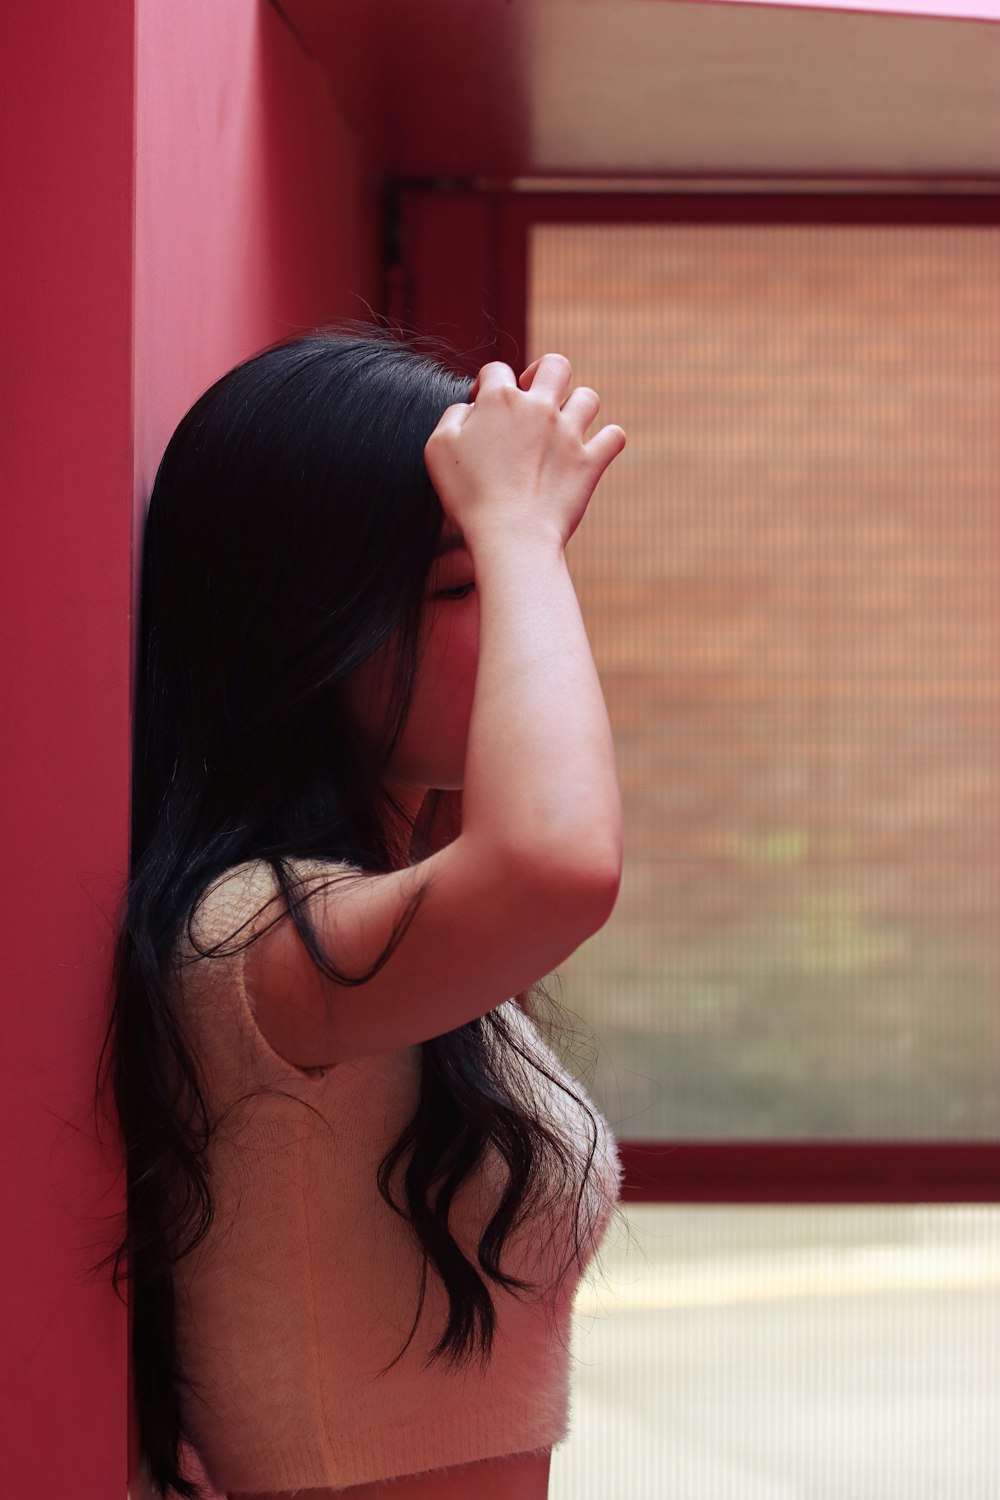 a woman leaning against a red wall with her hand on her head